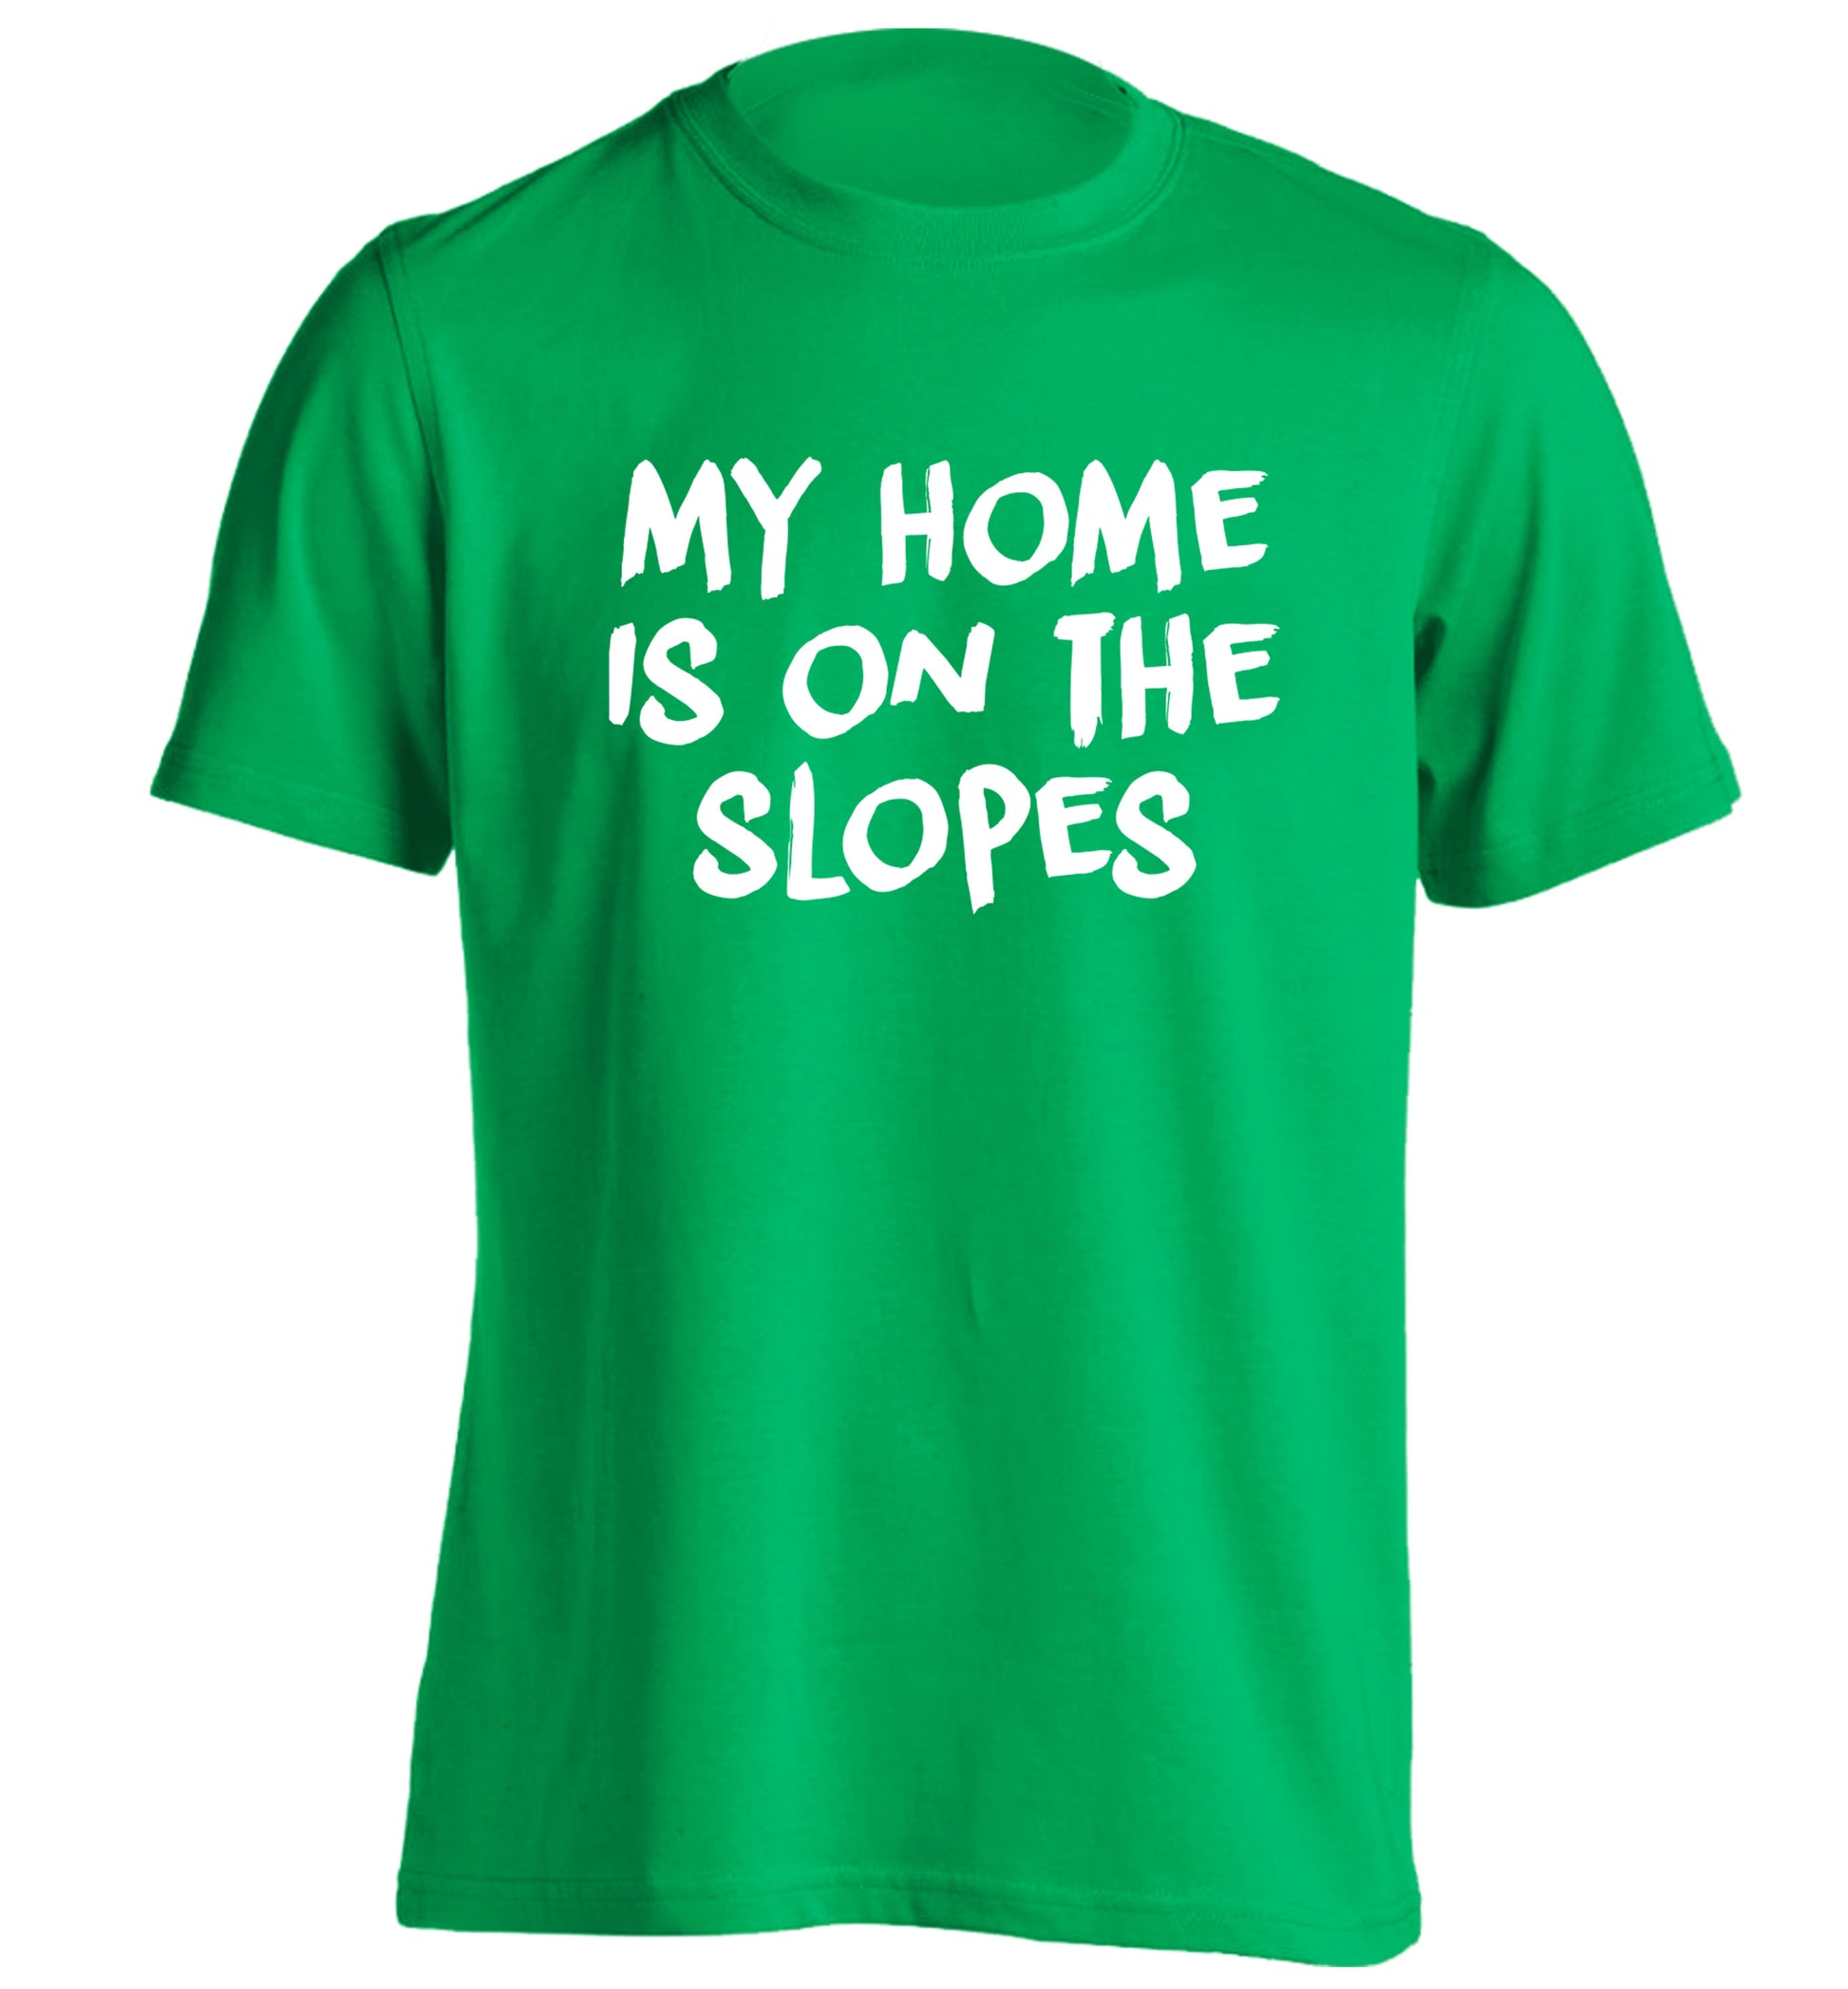 My home is on the slopes adults unisexgreen Tshirt 2XL